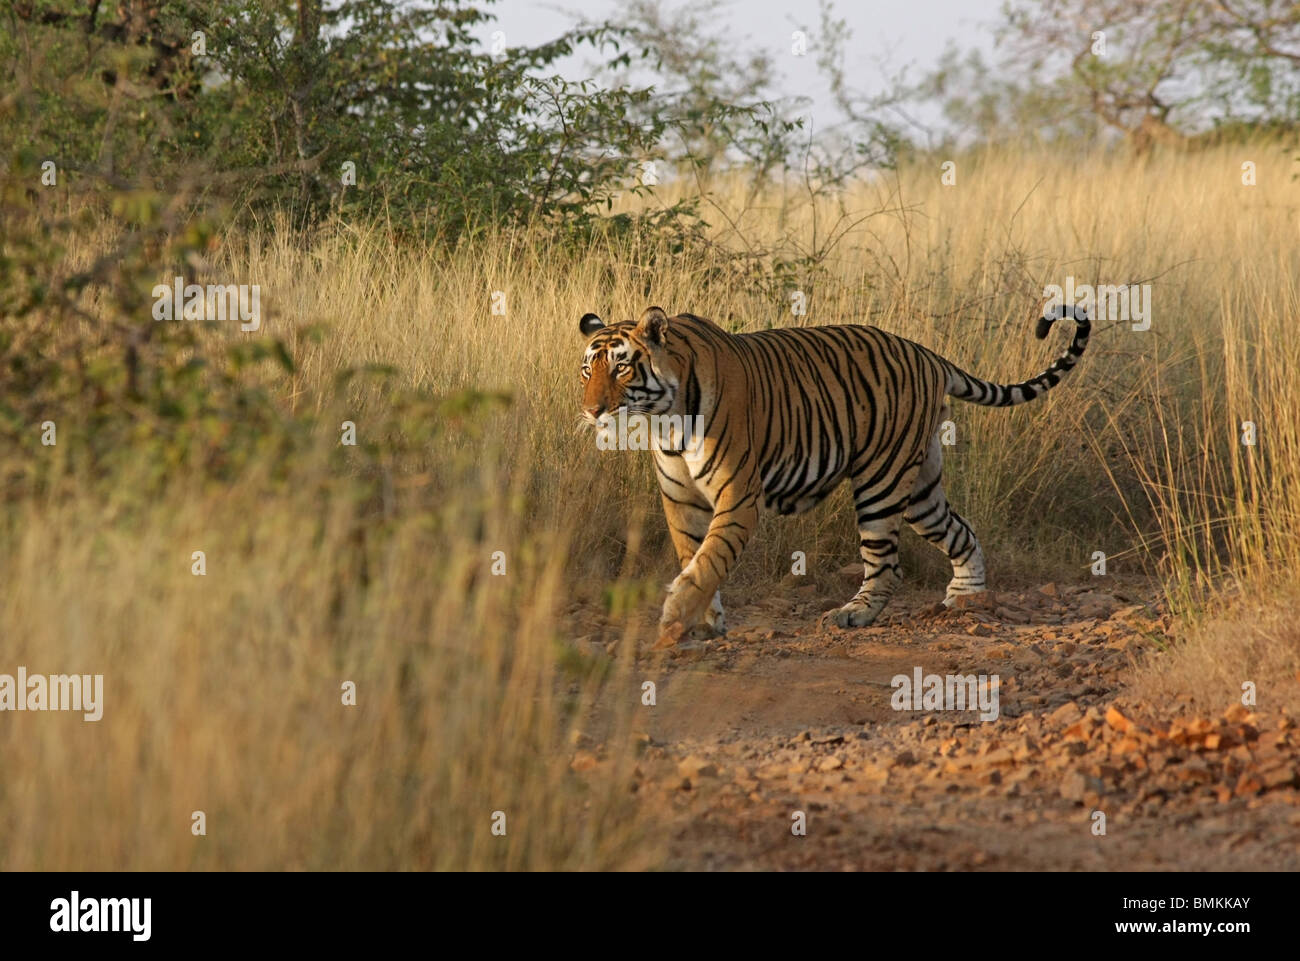 Male Tiger walking through the tall grass in Ranthambhore National Park, India Stock Photo